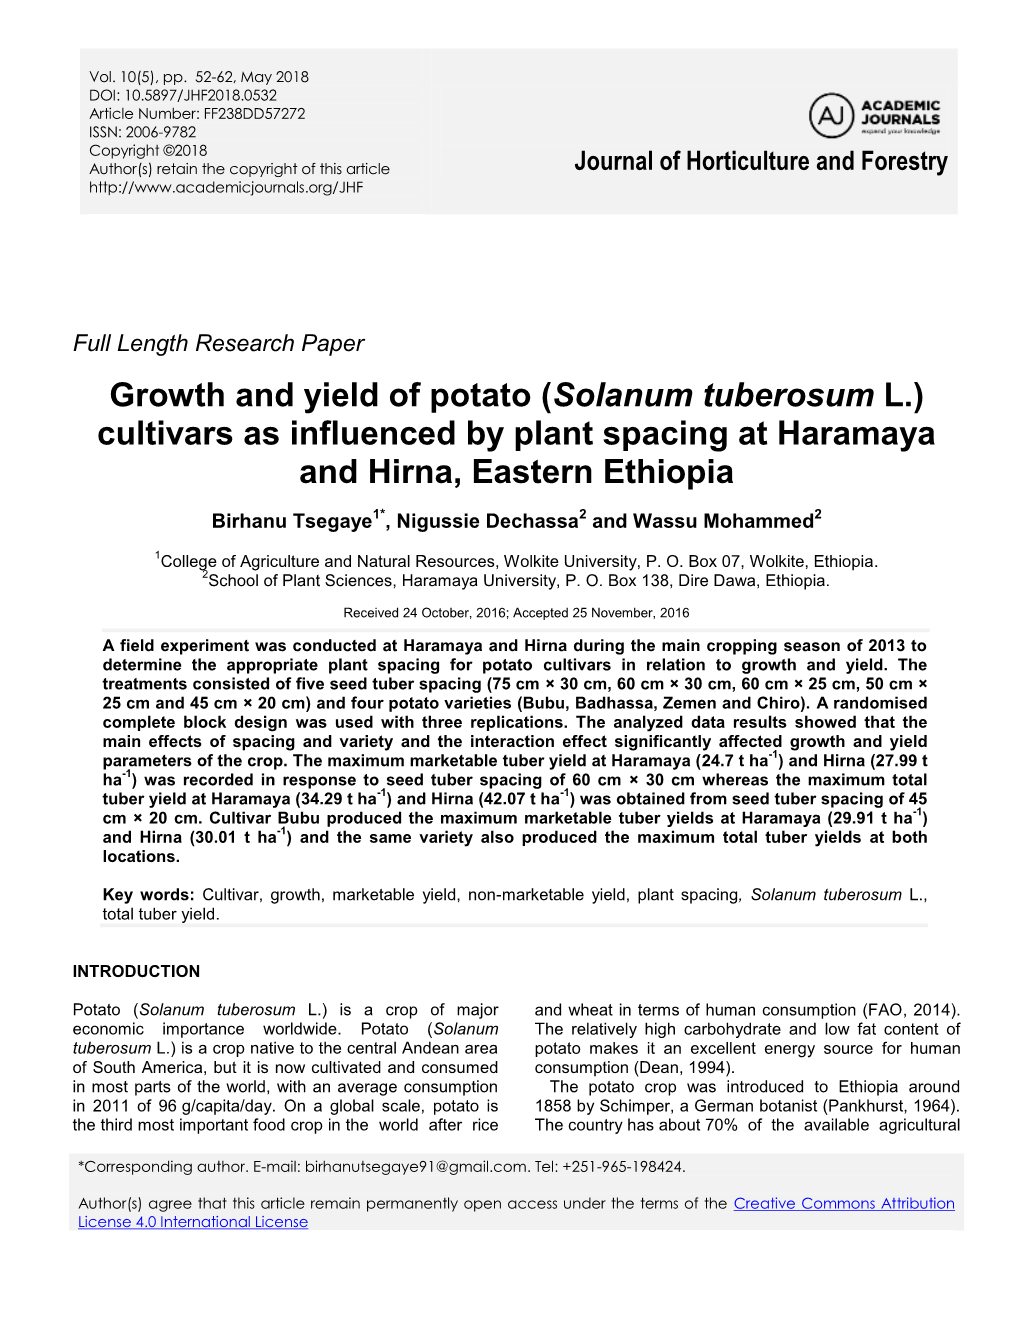 Growth and Yield of Potato (Solanum Tuberosum L.) Cultivars As Influenced by Plant Spacing at Haramaya and Hirna, Eastern Ethiopia